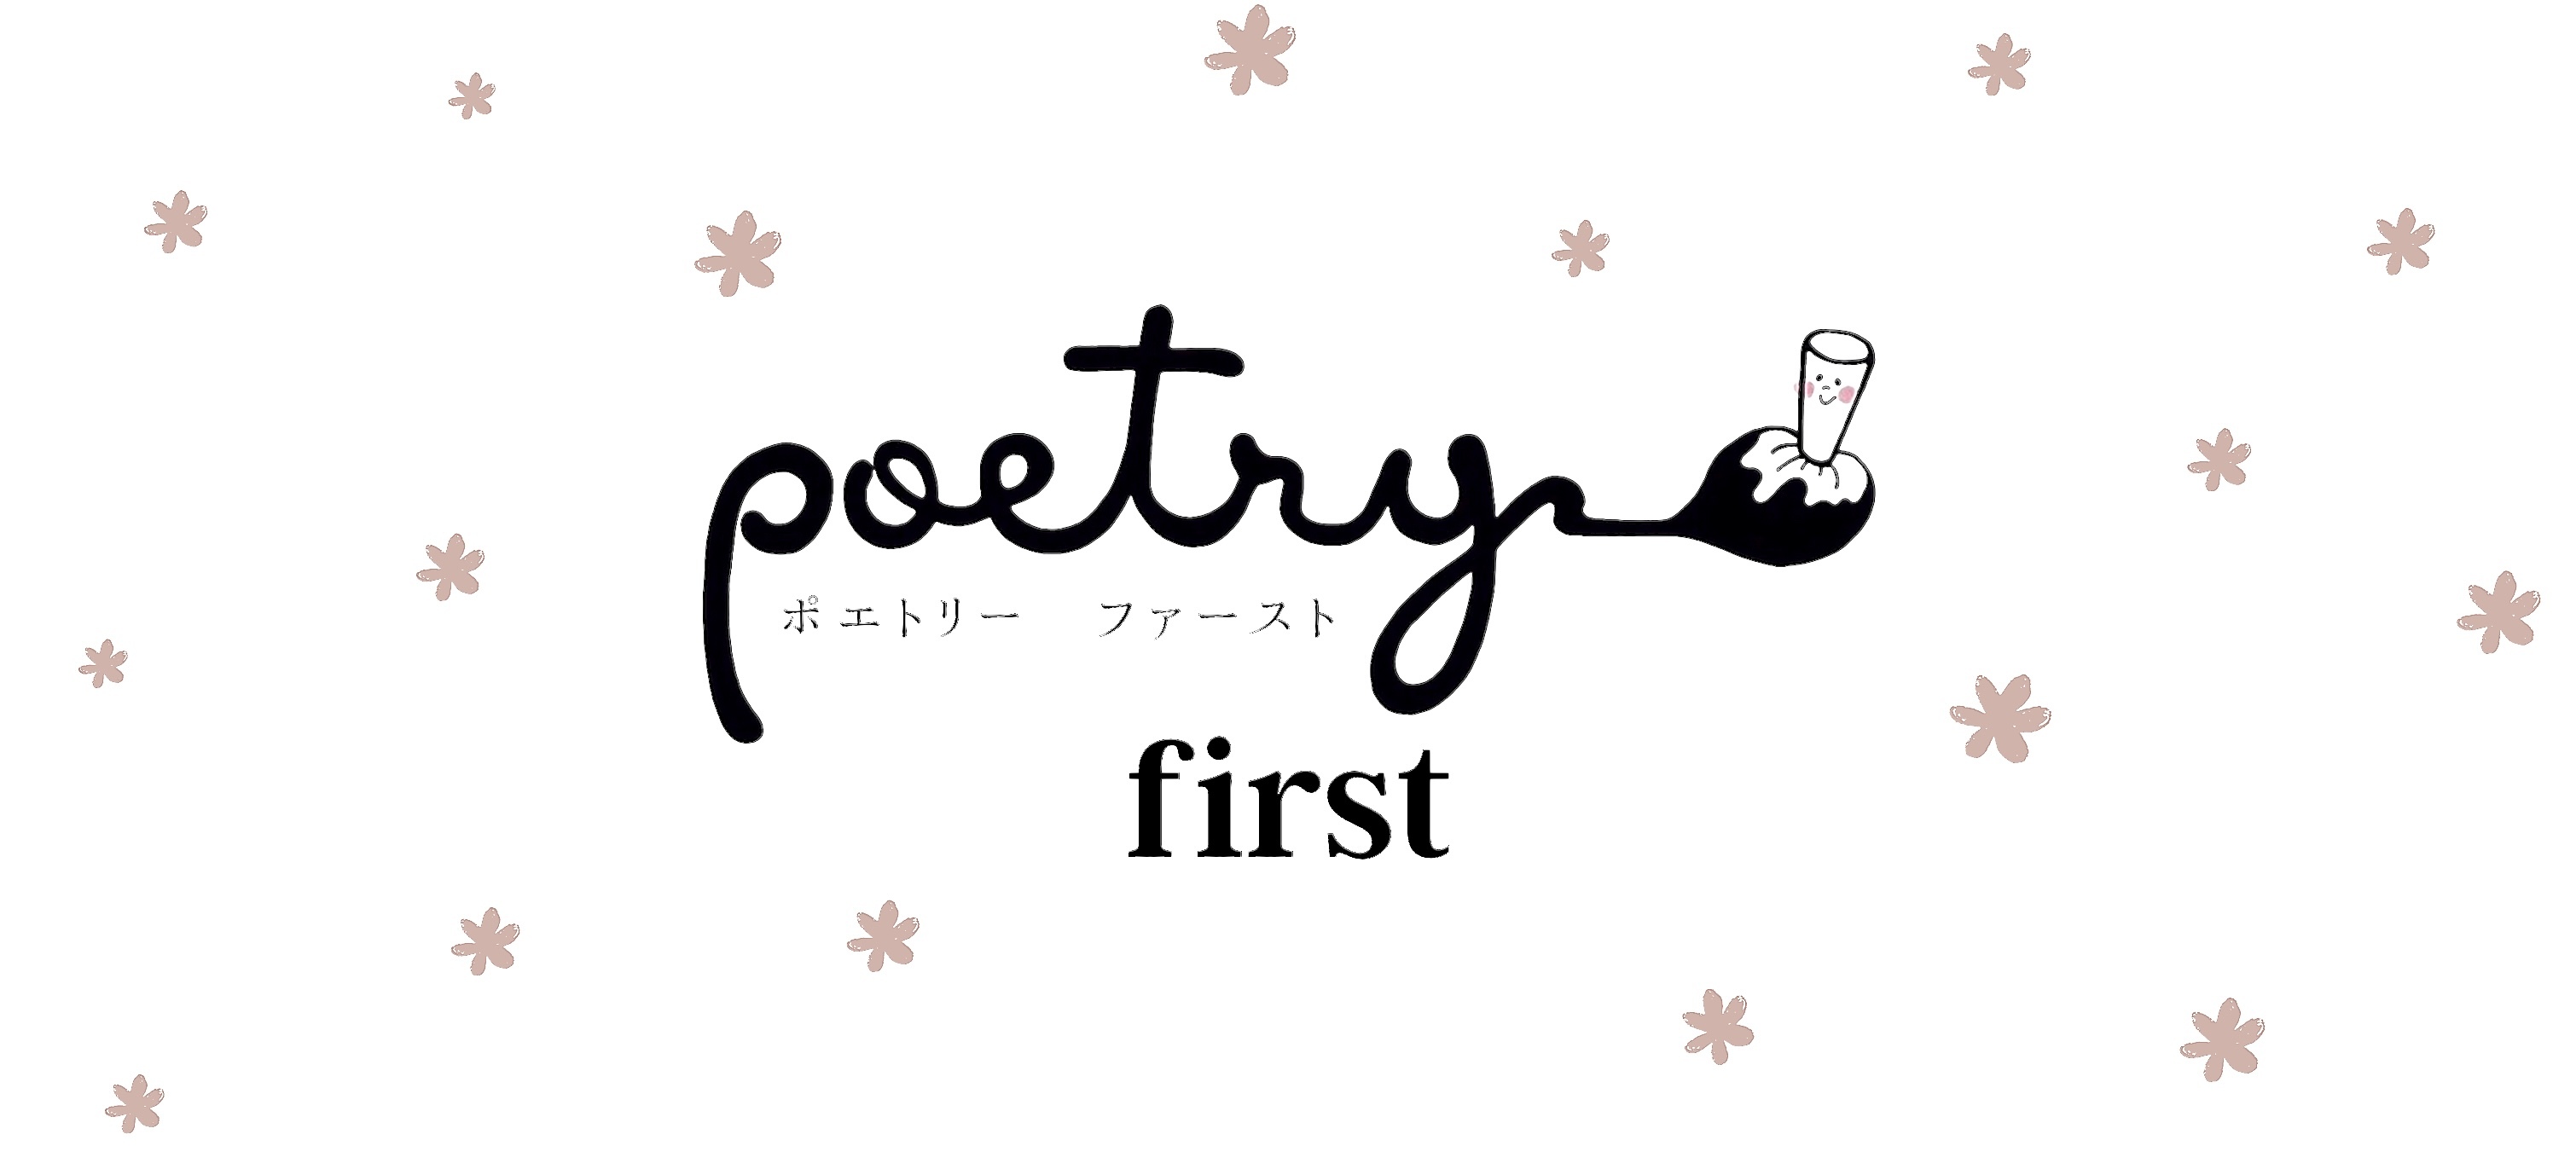 poetry first